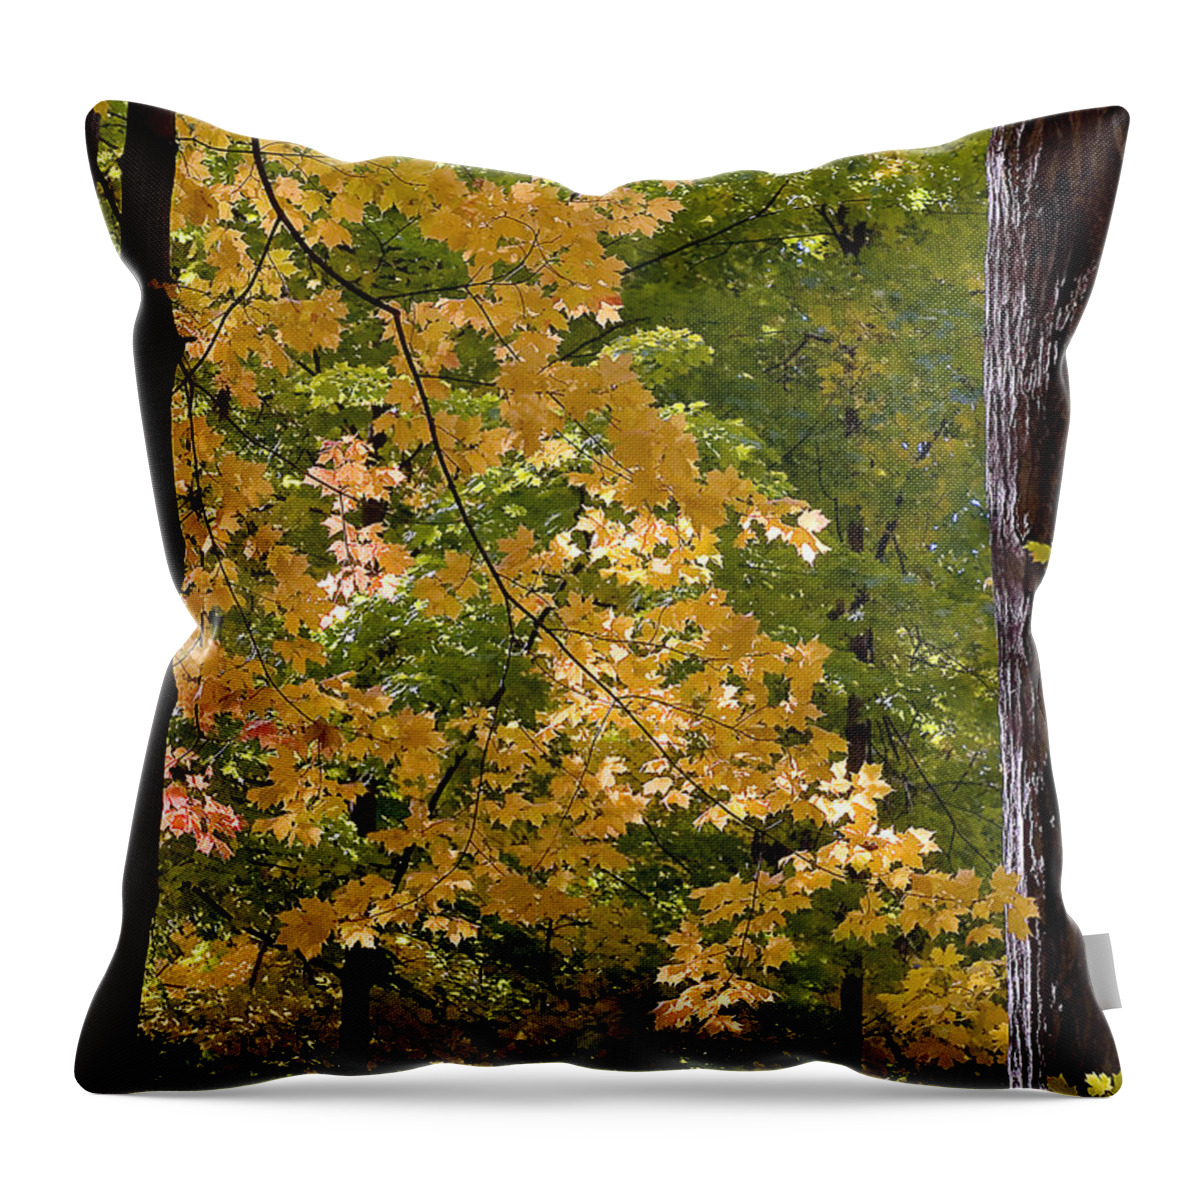 Autumn Throw Pillow featuring the photograph Fall Maples #1 by Steven Ralser